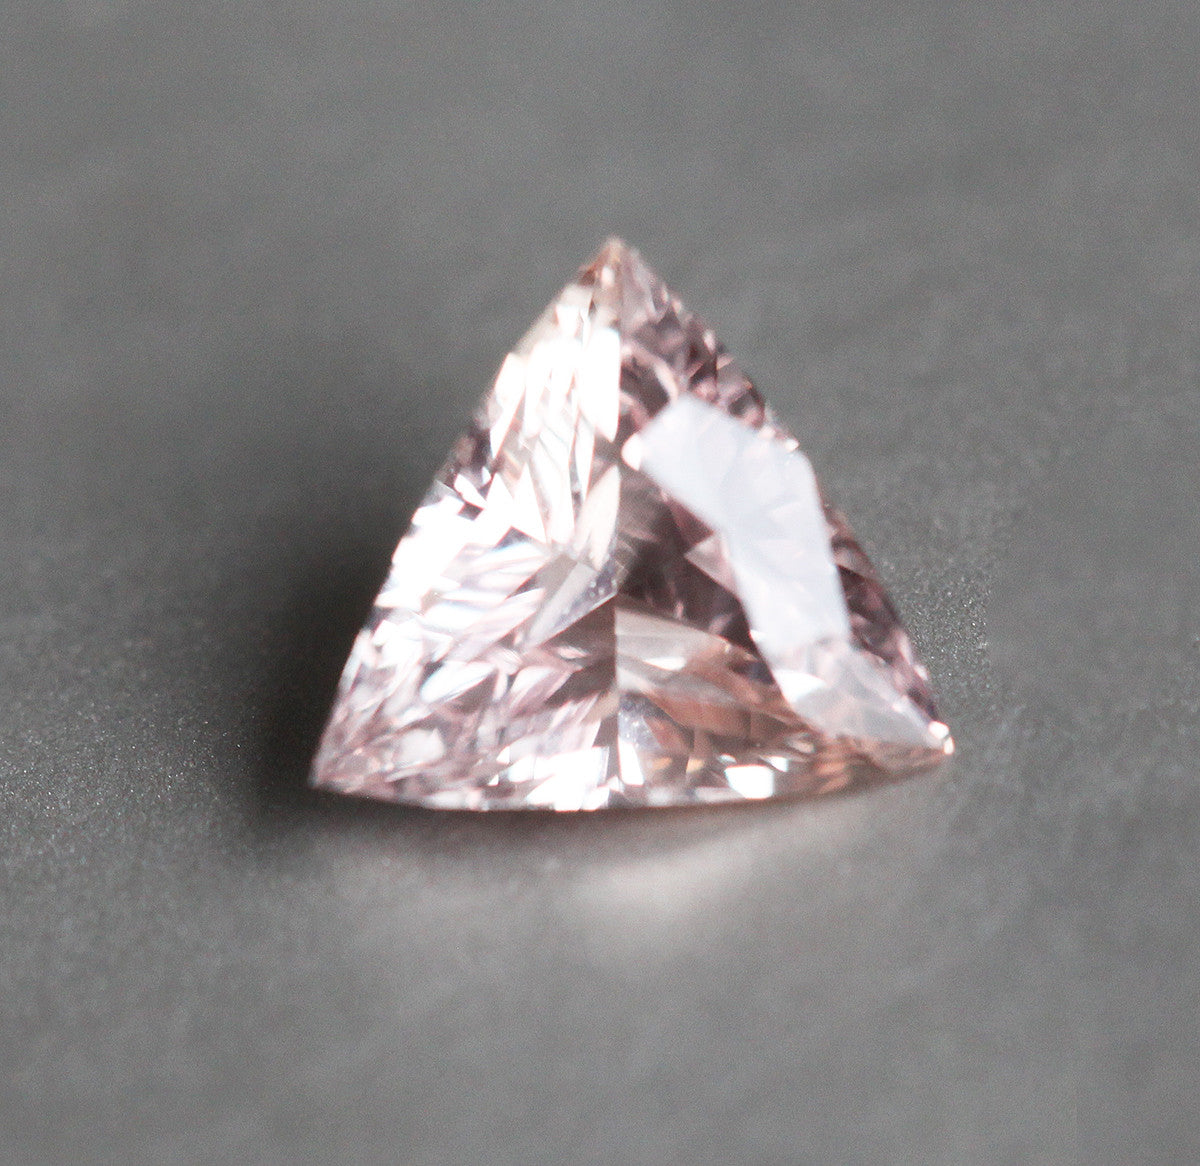 Loose triangle peach pink sapphire